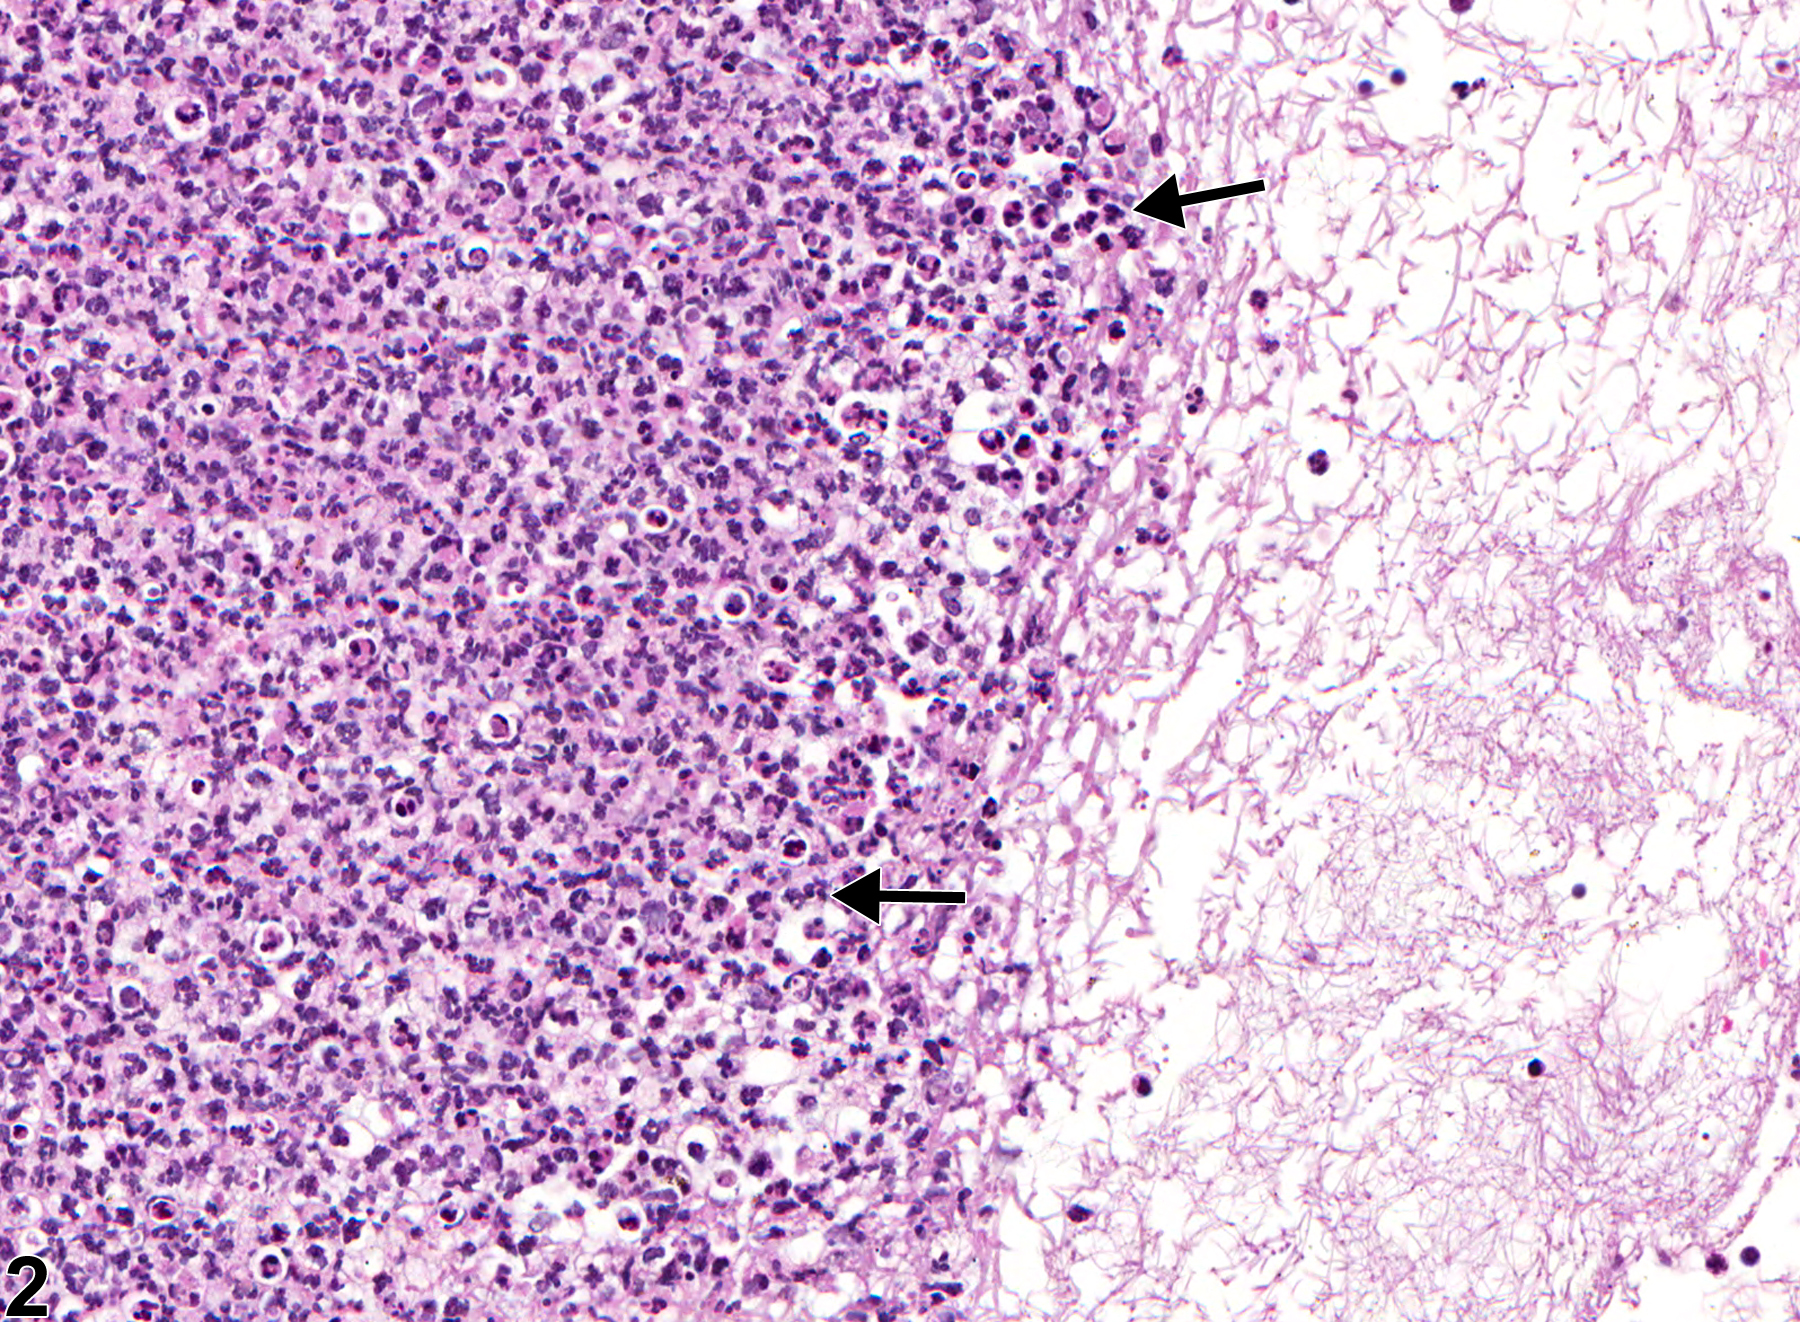 Image of inflammation in the lymph node from a male F344/N rat in a chronic study